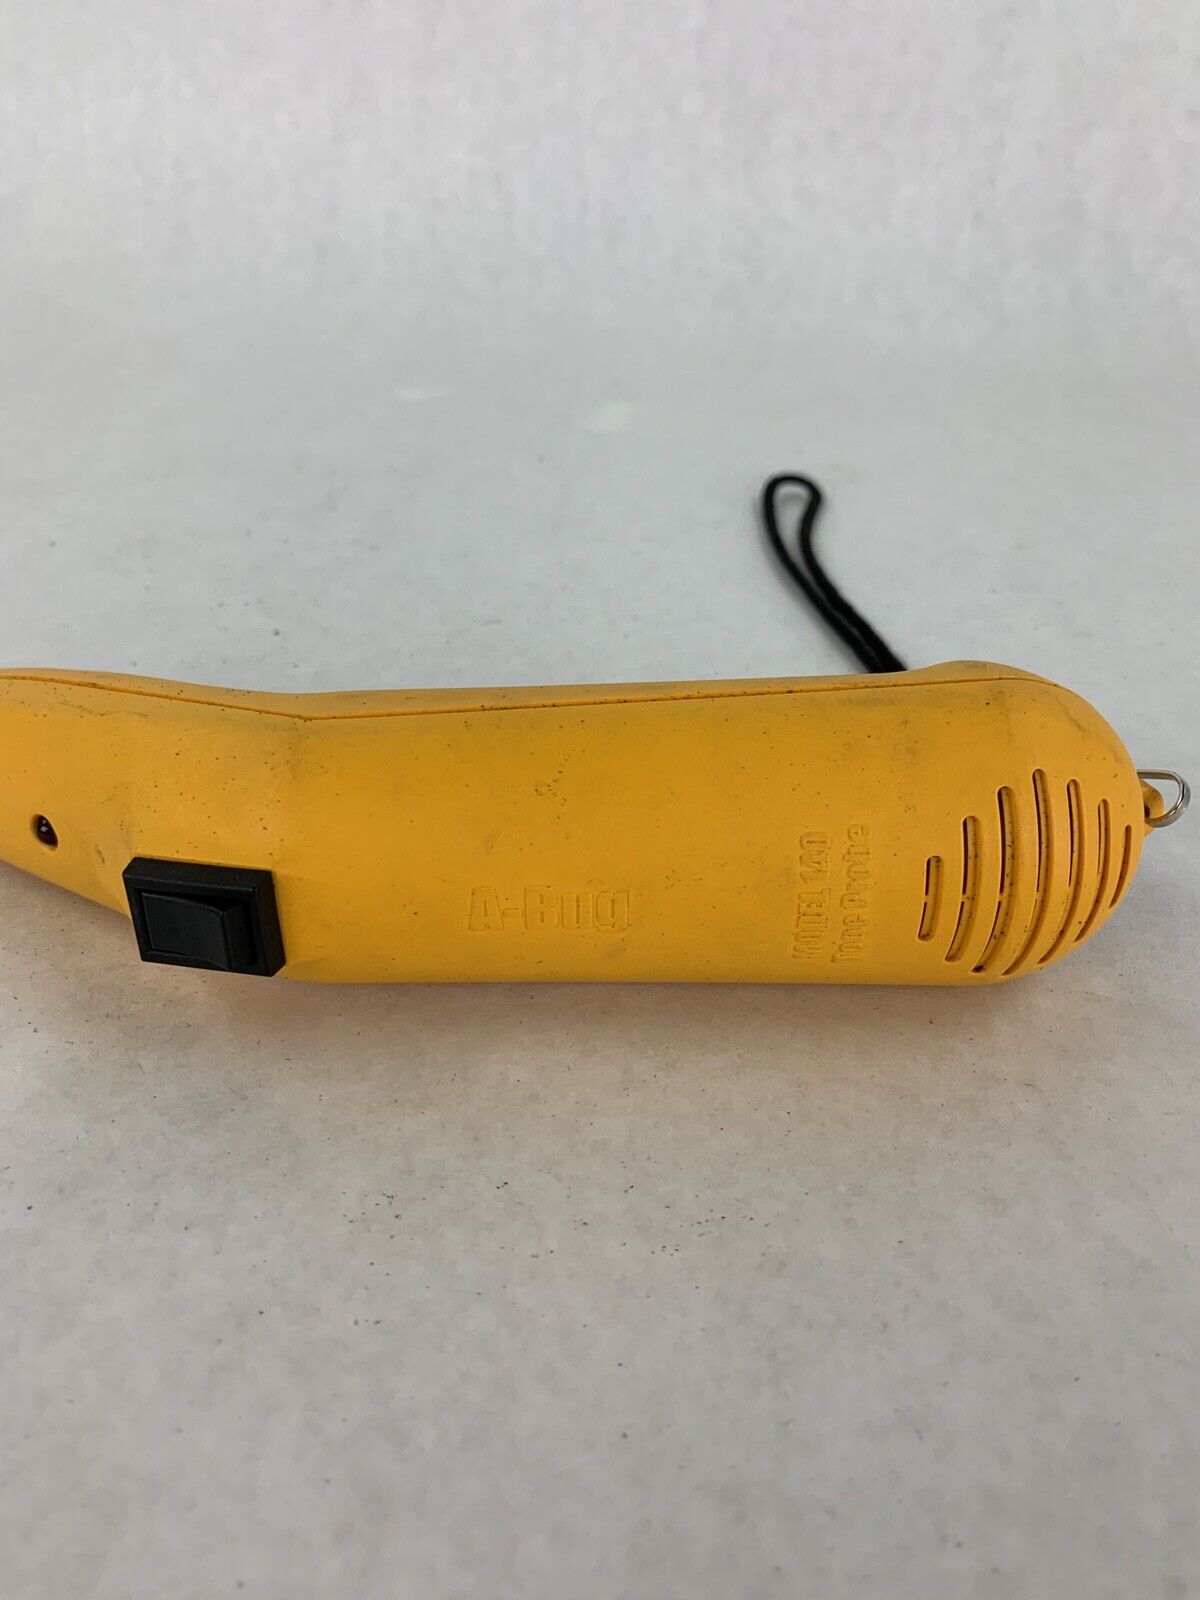 Fluke One Touch Series II Pro w/ A-Bug 140 and 1 & 4 Loop Backs Tested